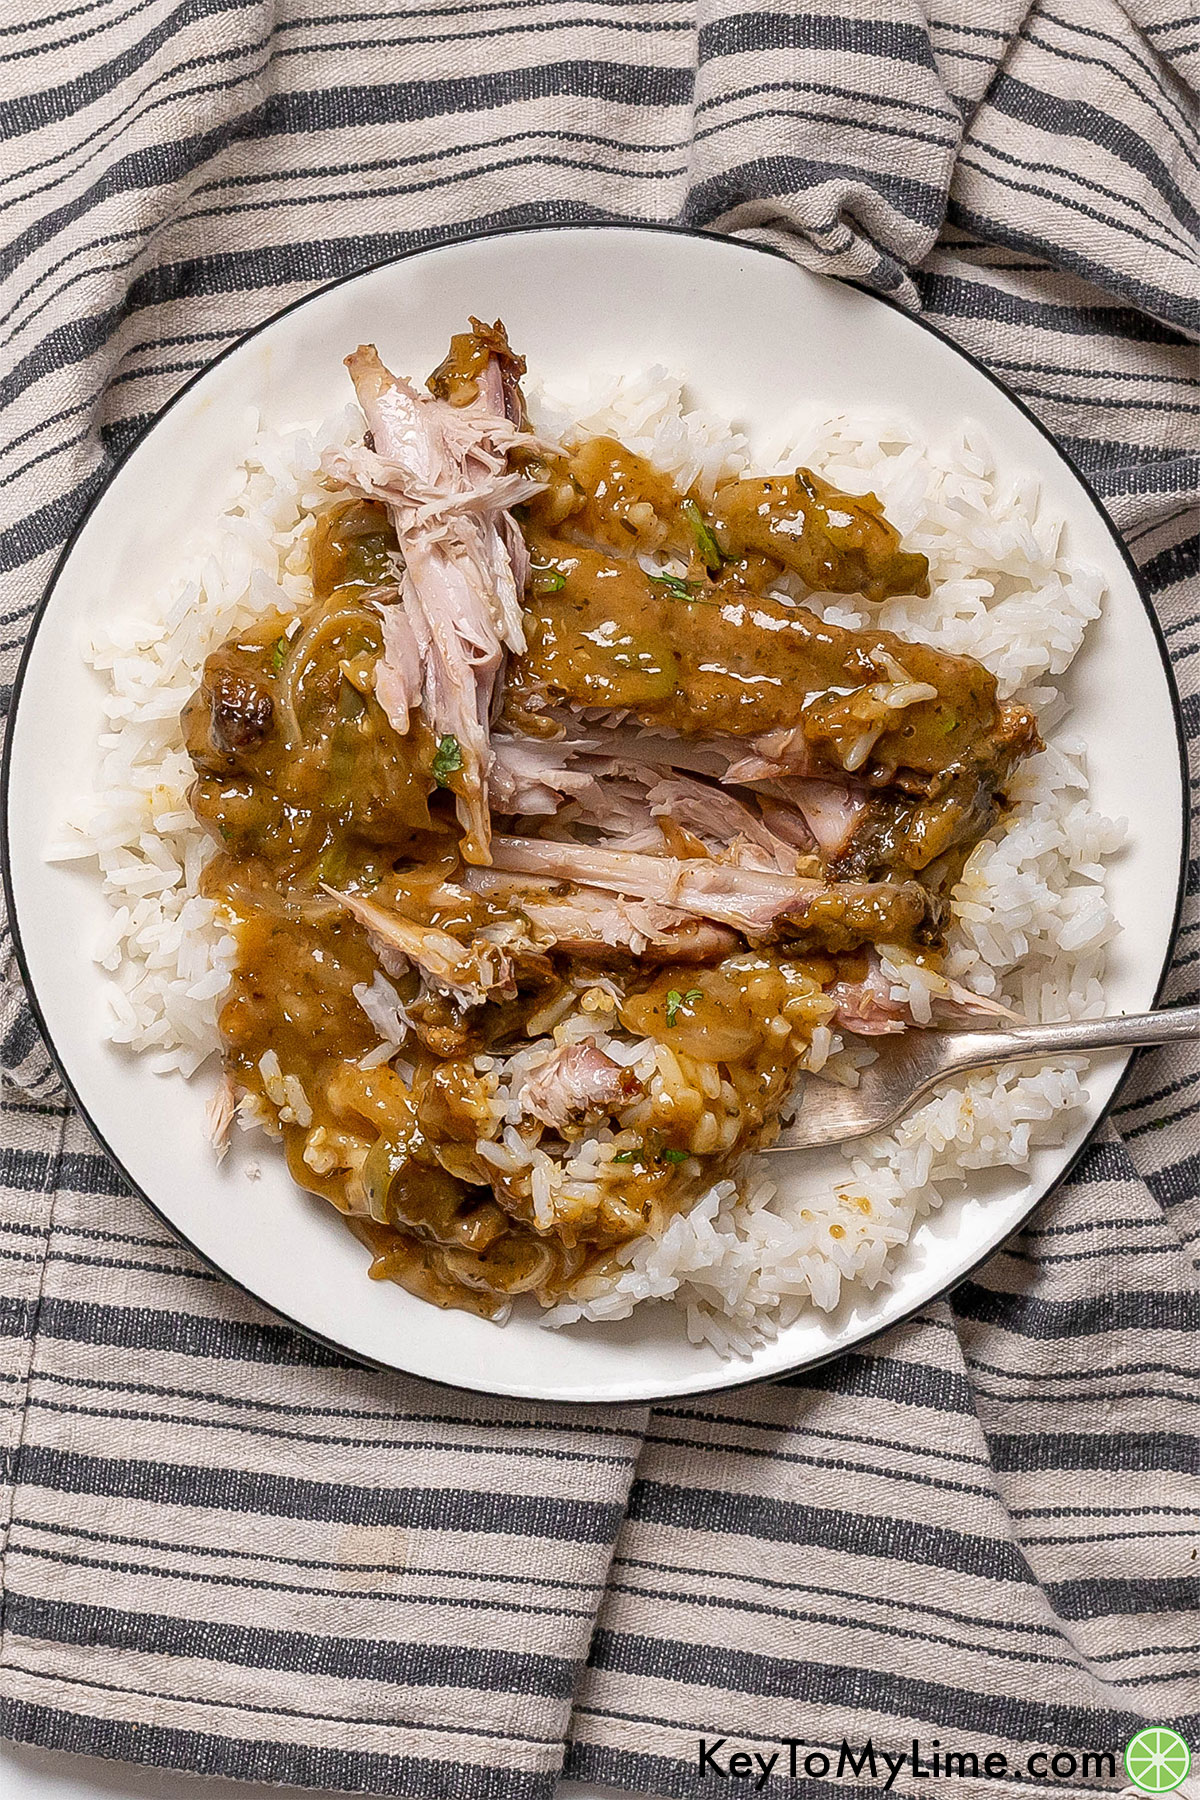 An overhead image of a white dinner plate show a cut up turkey wing and gravy over rice.